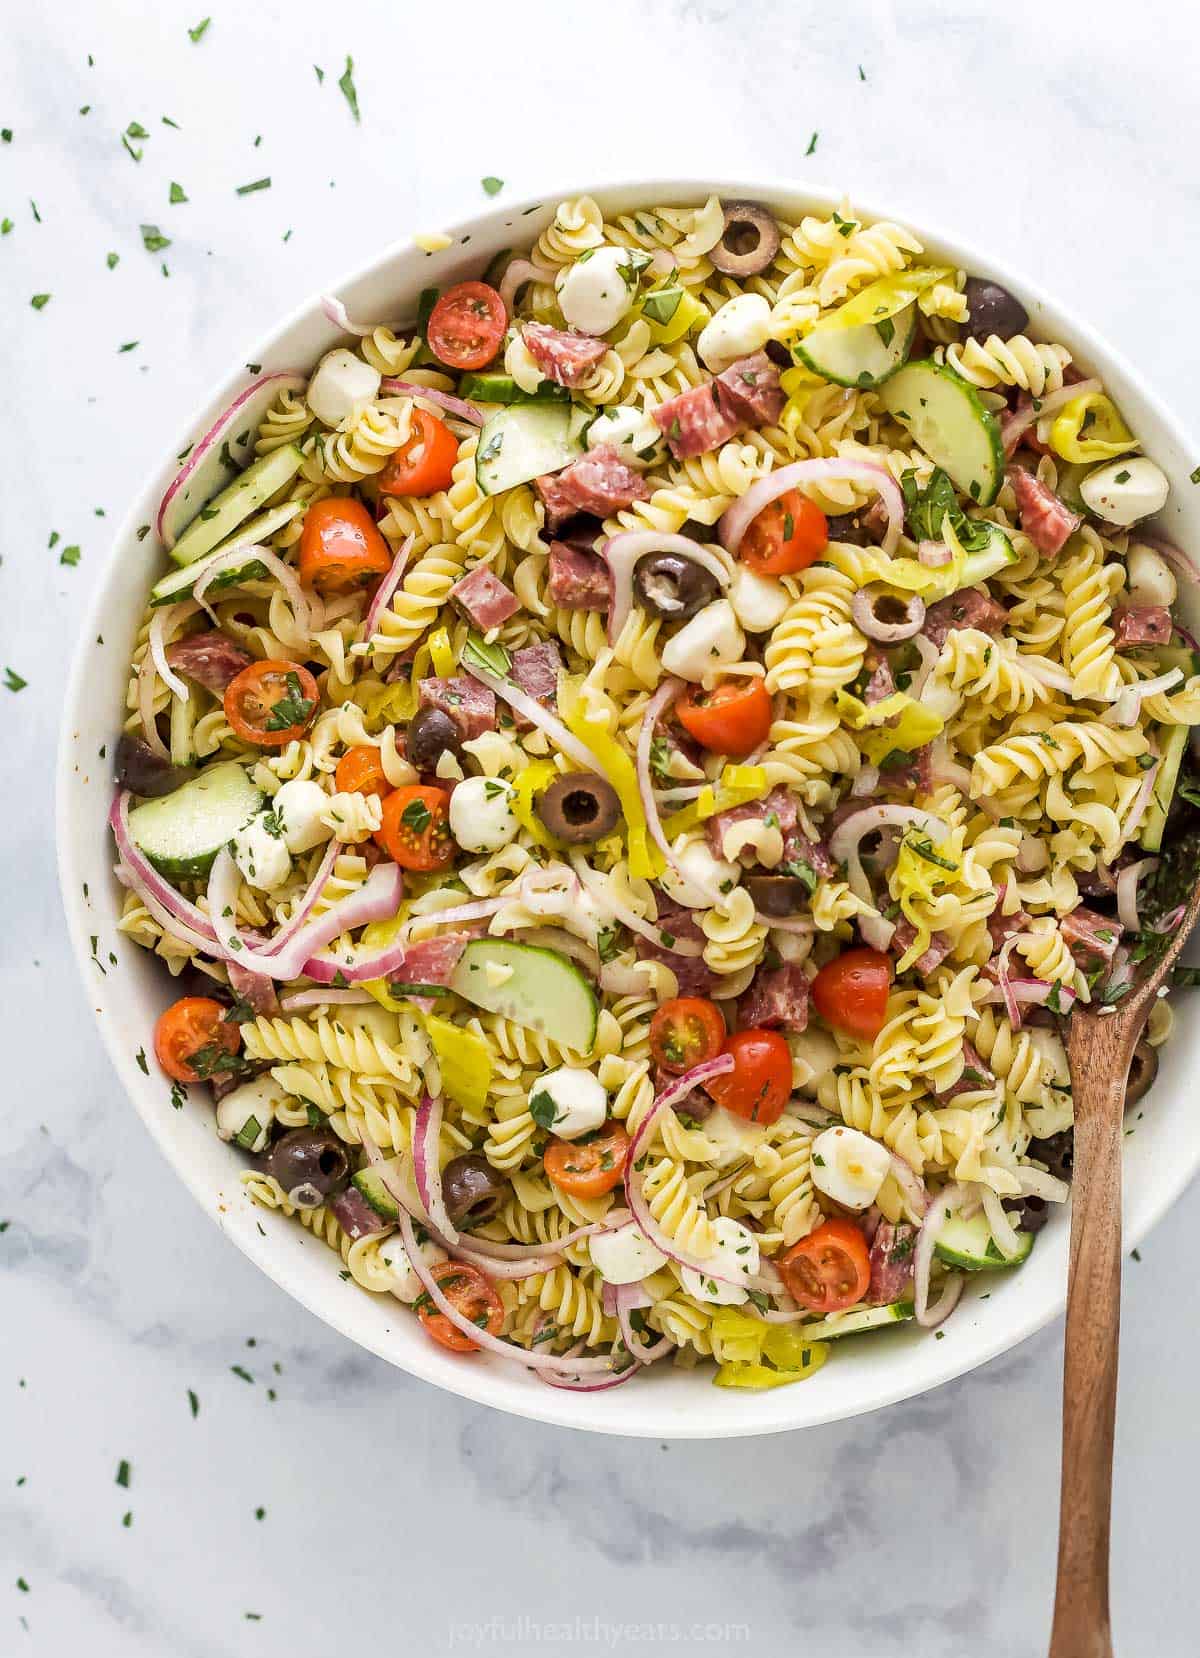 One big bowl of Italian pasta salad placed on top of a marble surface